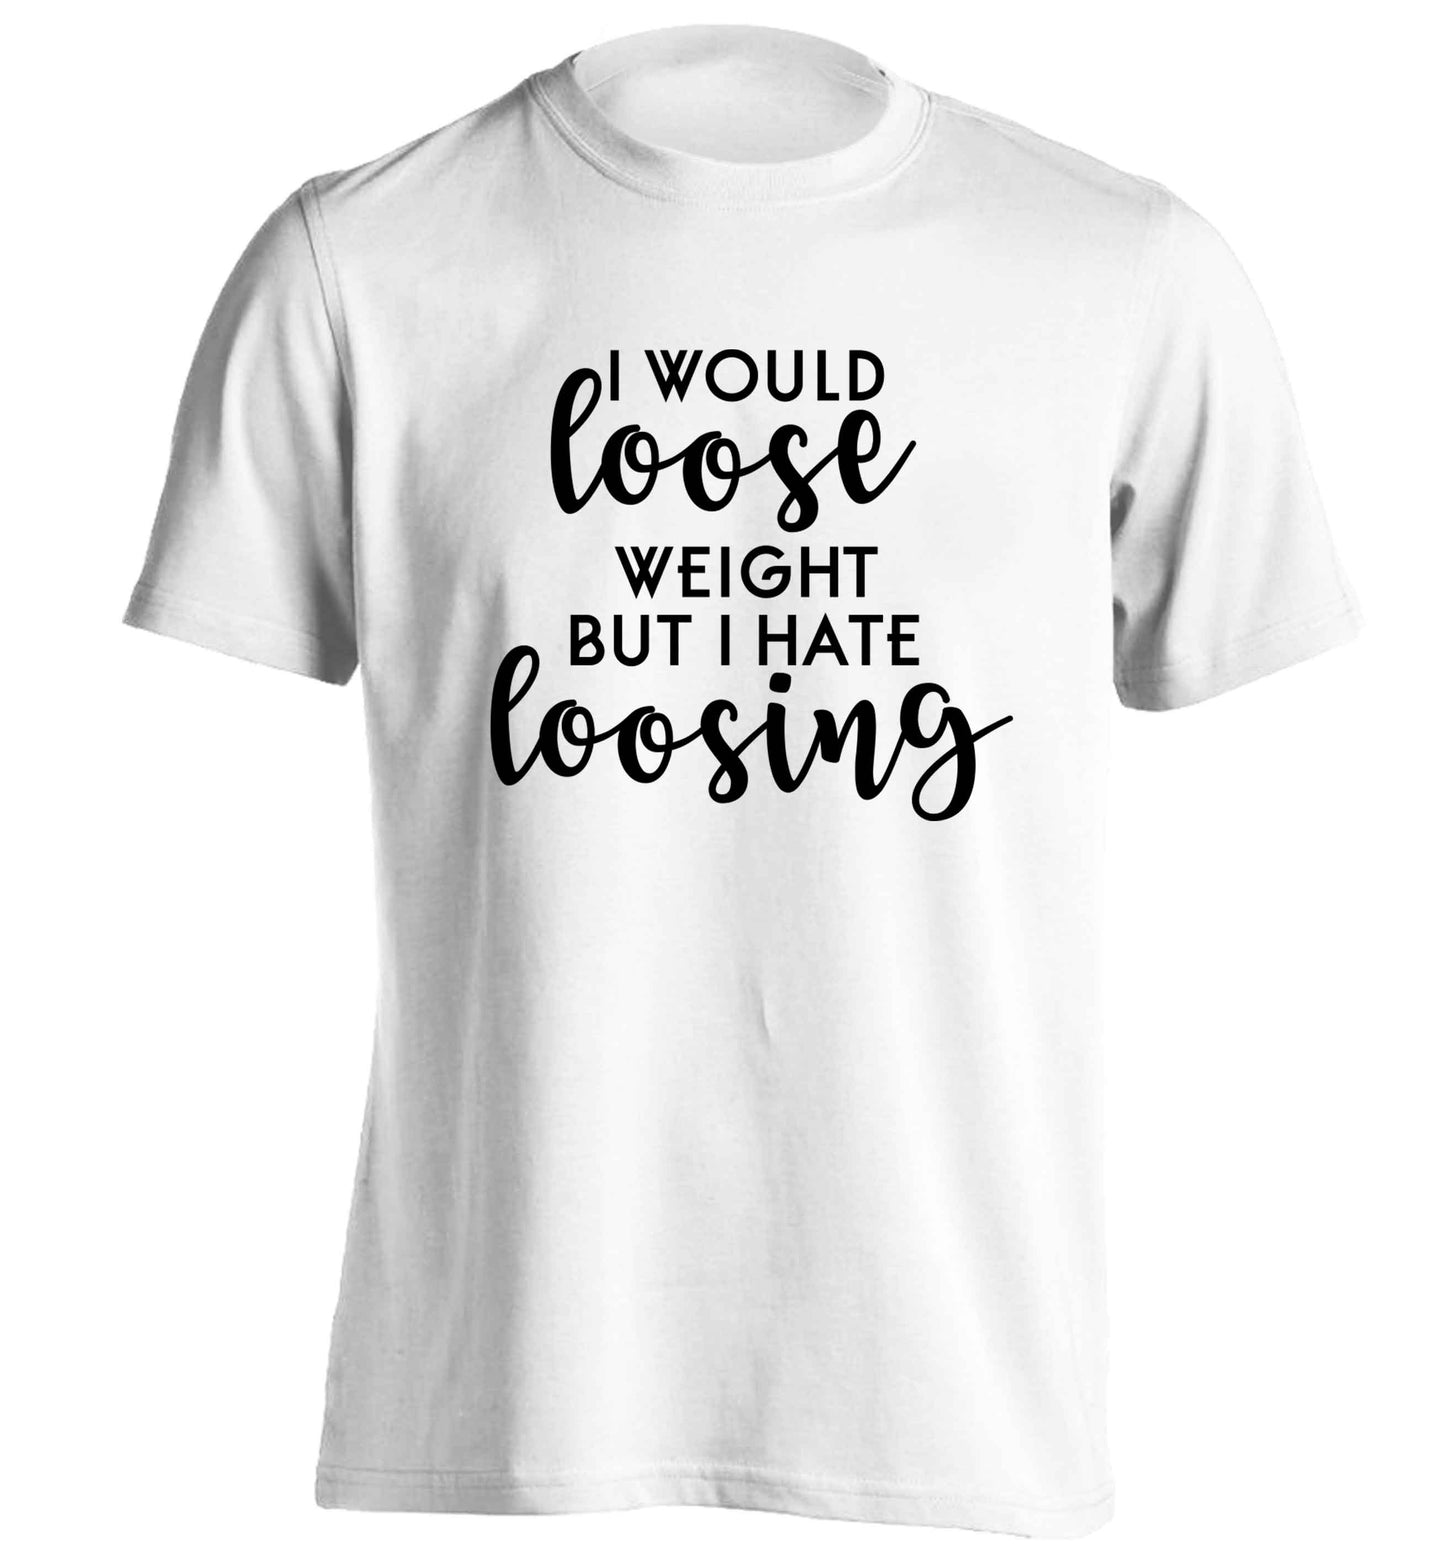 I would loose weight but I hate loosing adults unisex white Tshirt 2XL